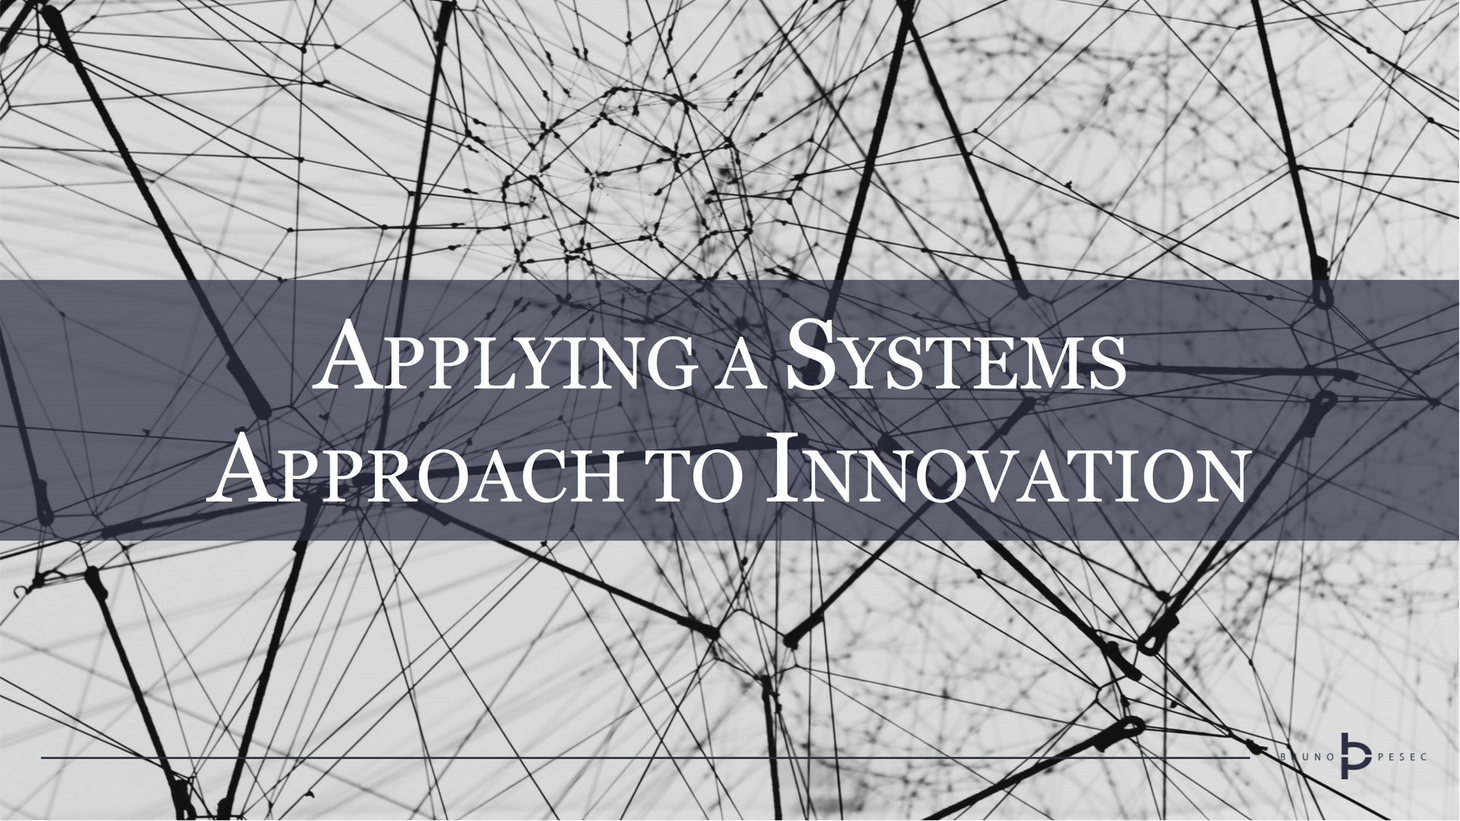 Applying a systems approach to innovation